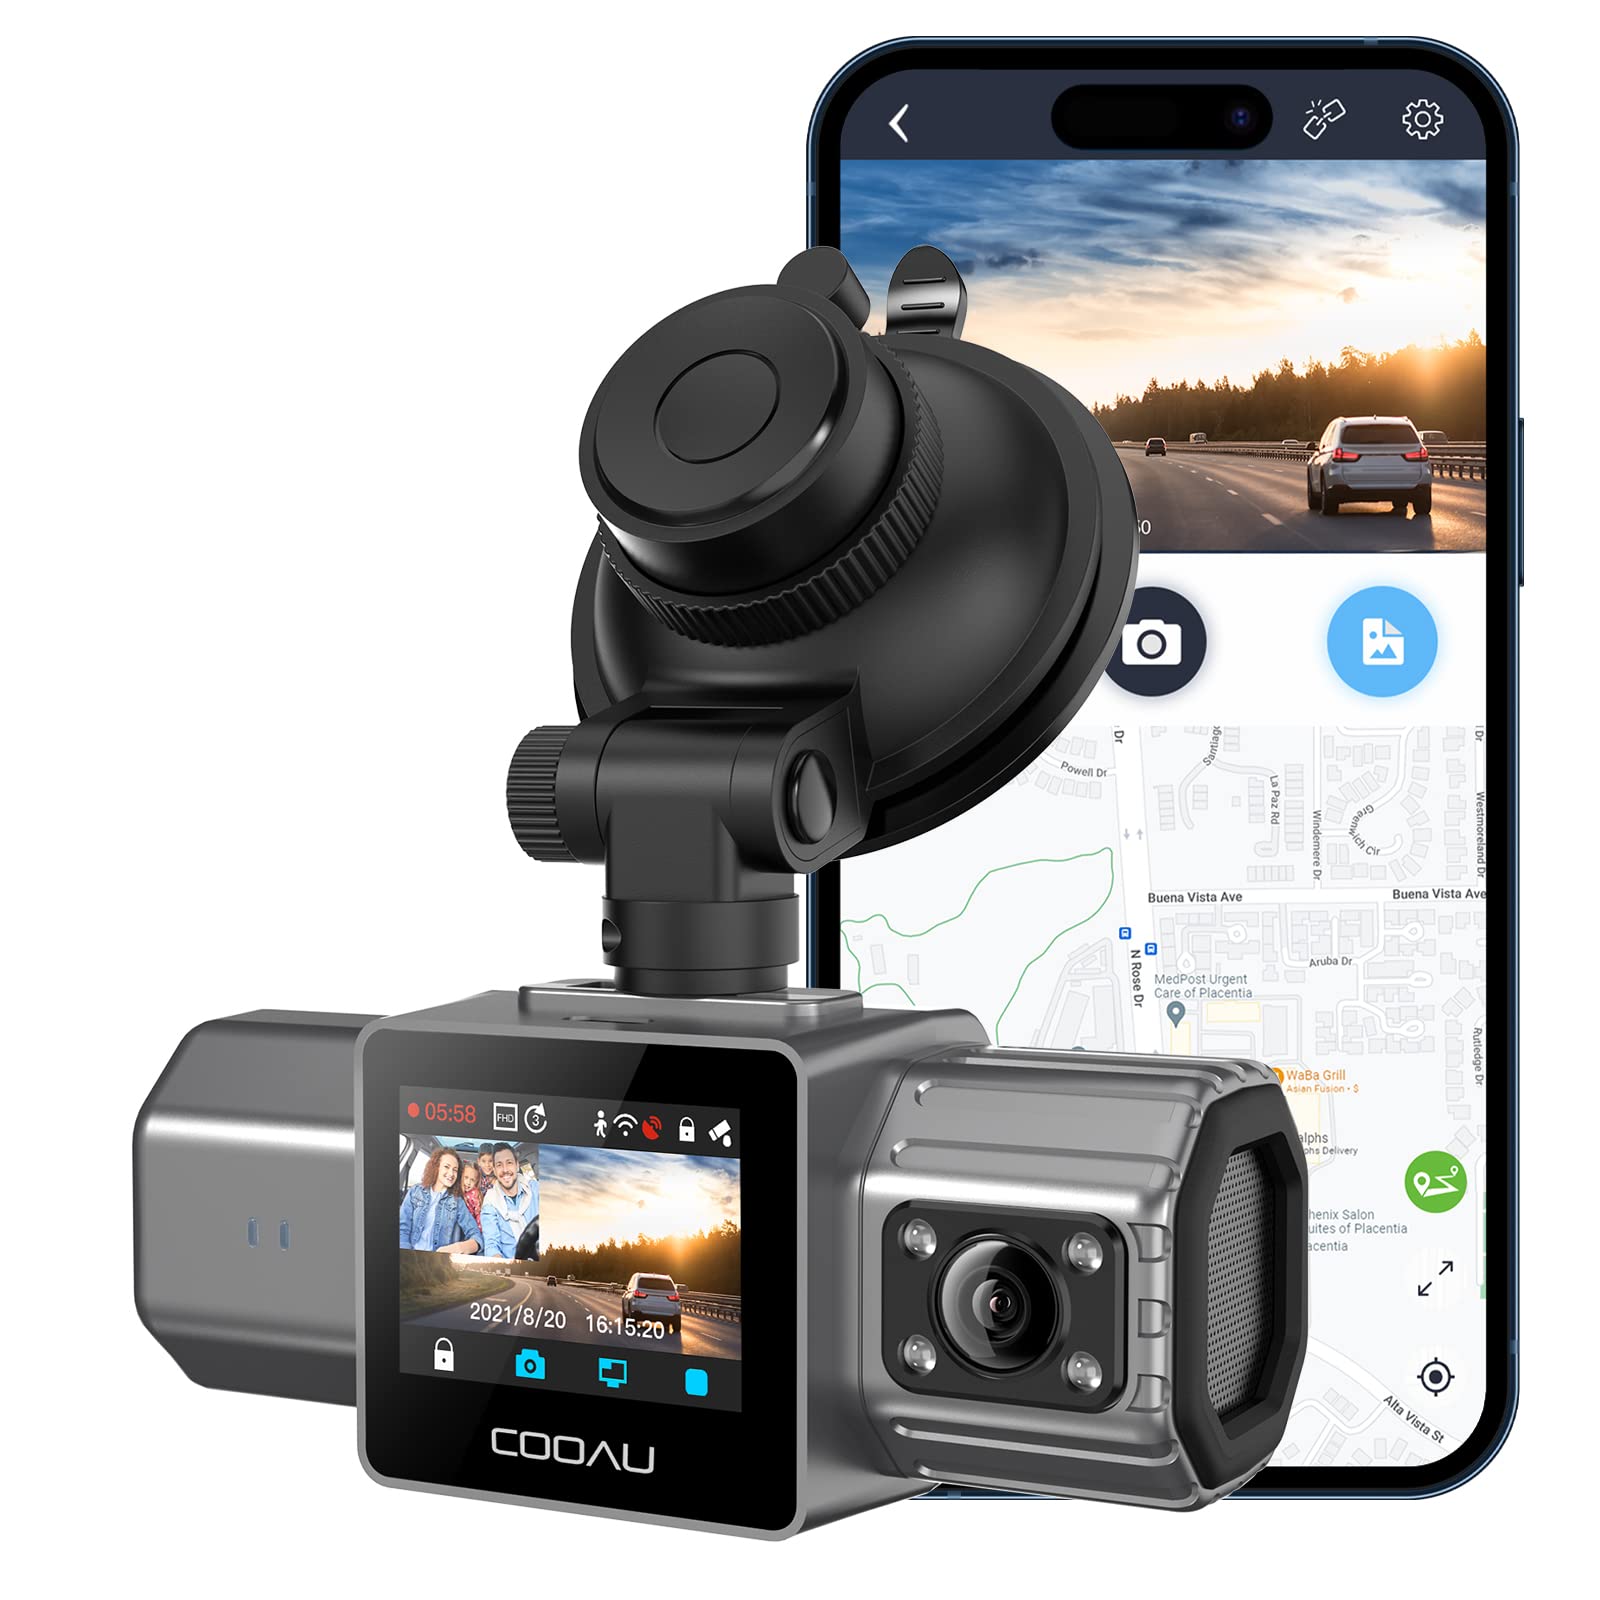 COOAU Dual Dash Cam with Built-in GPS, 1080P Front and Inside WiFi Dash Camera for Cars, Sony Sensor, Supercapacitor, 4 IR Night Vision, G-Sensor, Loop-Recording & Parking Mode (D20)